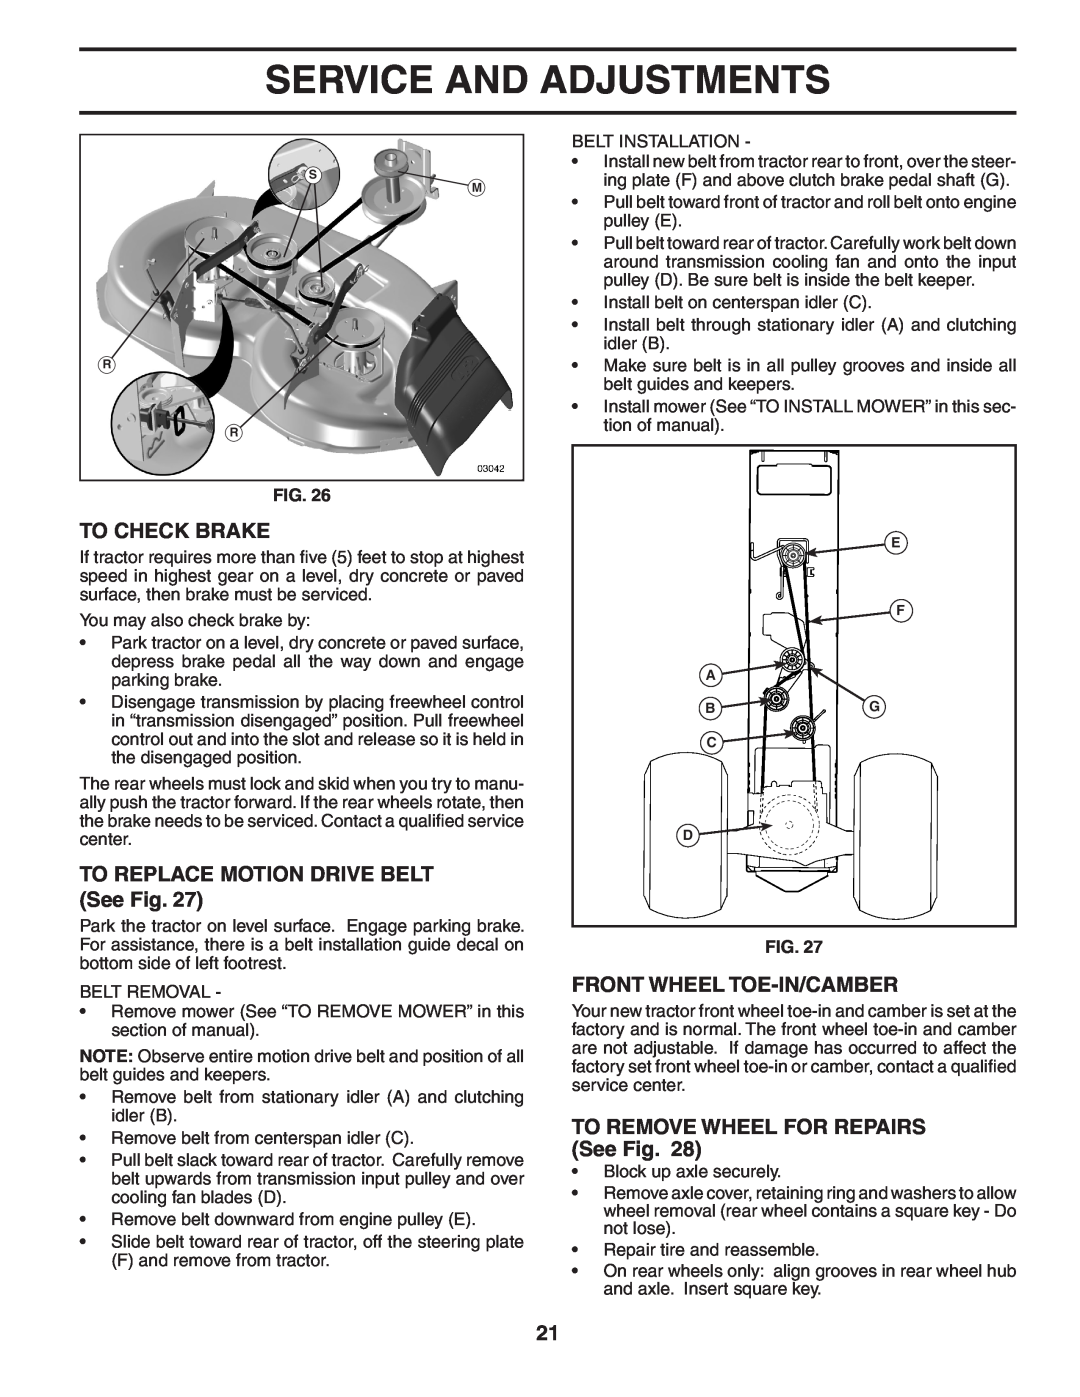 Poulan 403808 To Check Brake, TO REPLACE MOTION DRIVE BELT See Fig, Front Wheel Toe-In/Camber, Service And Adjustments 